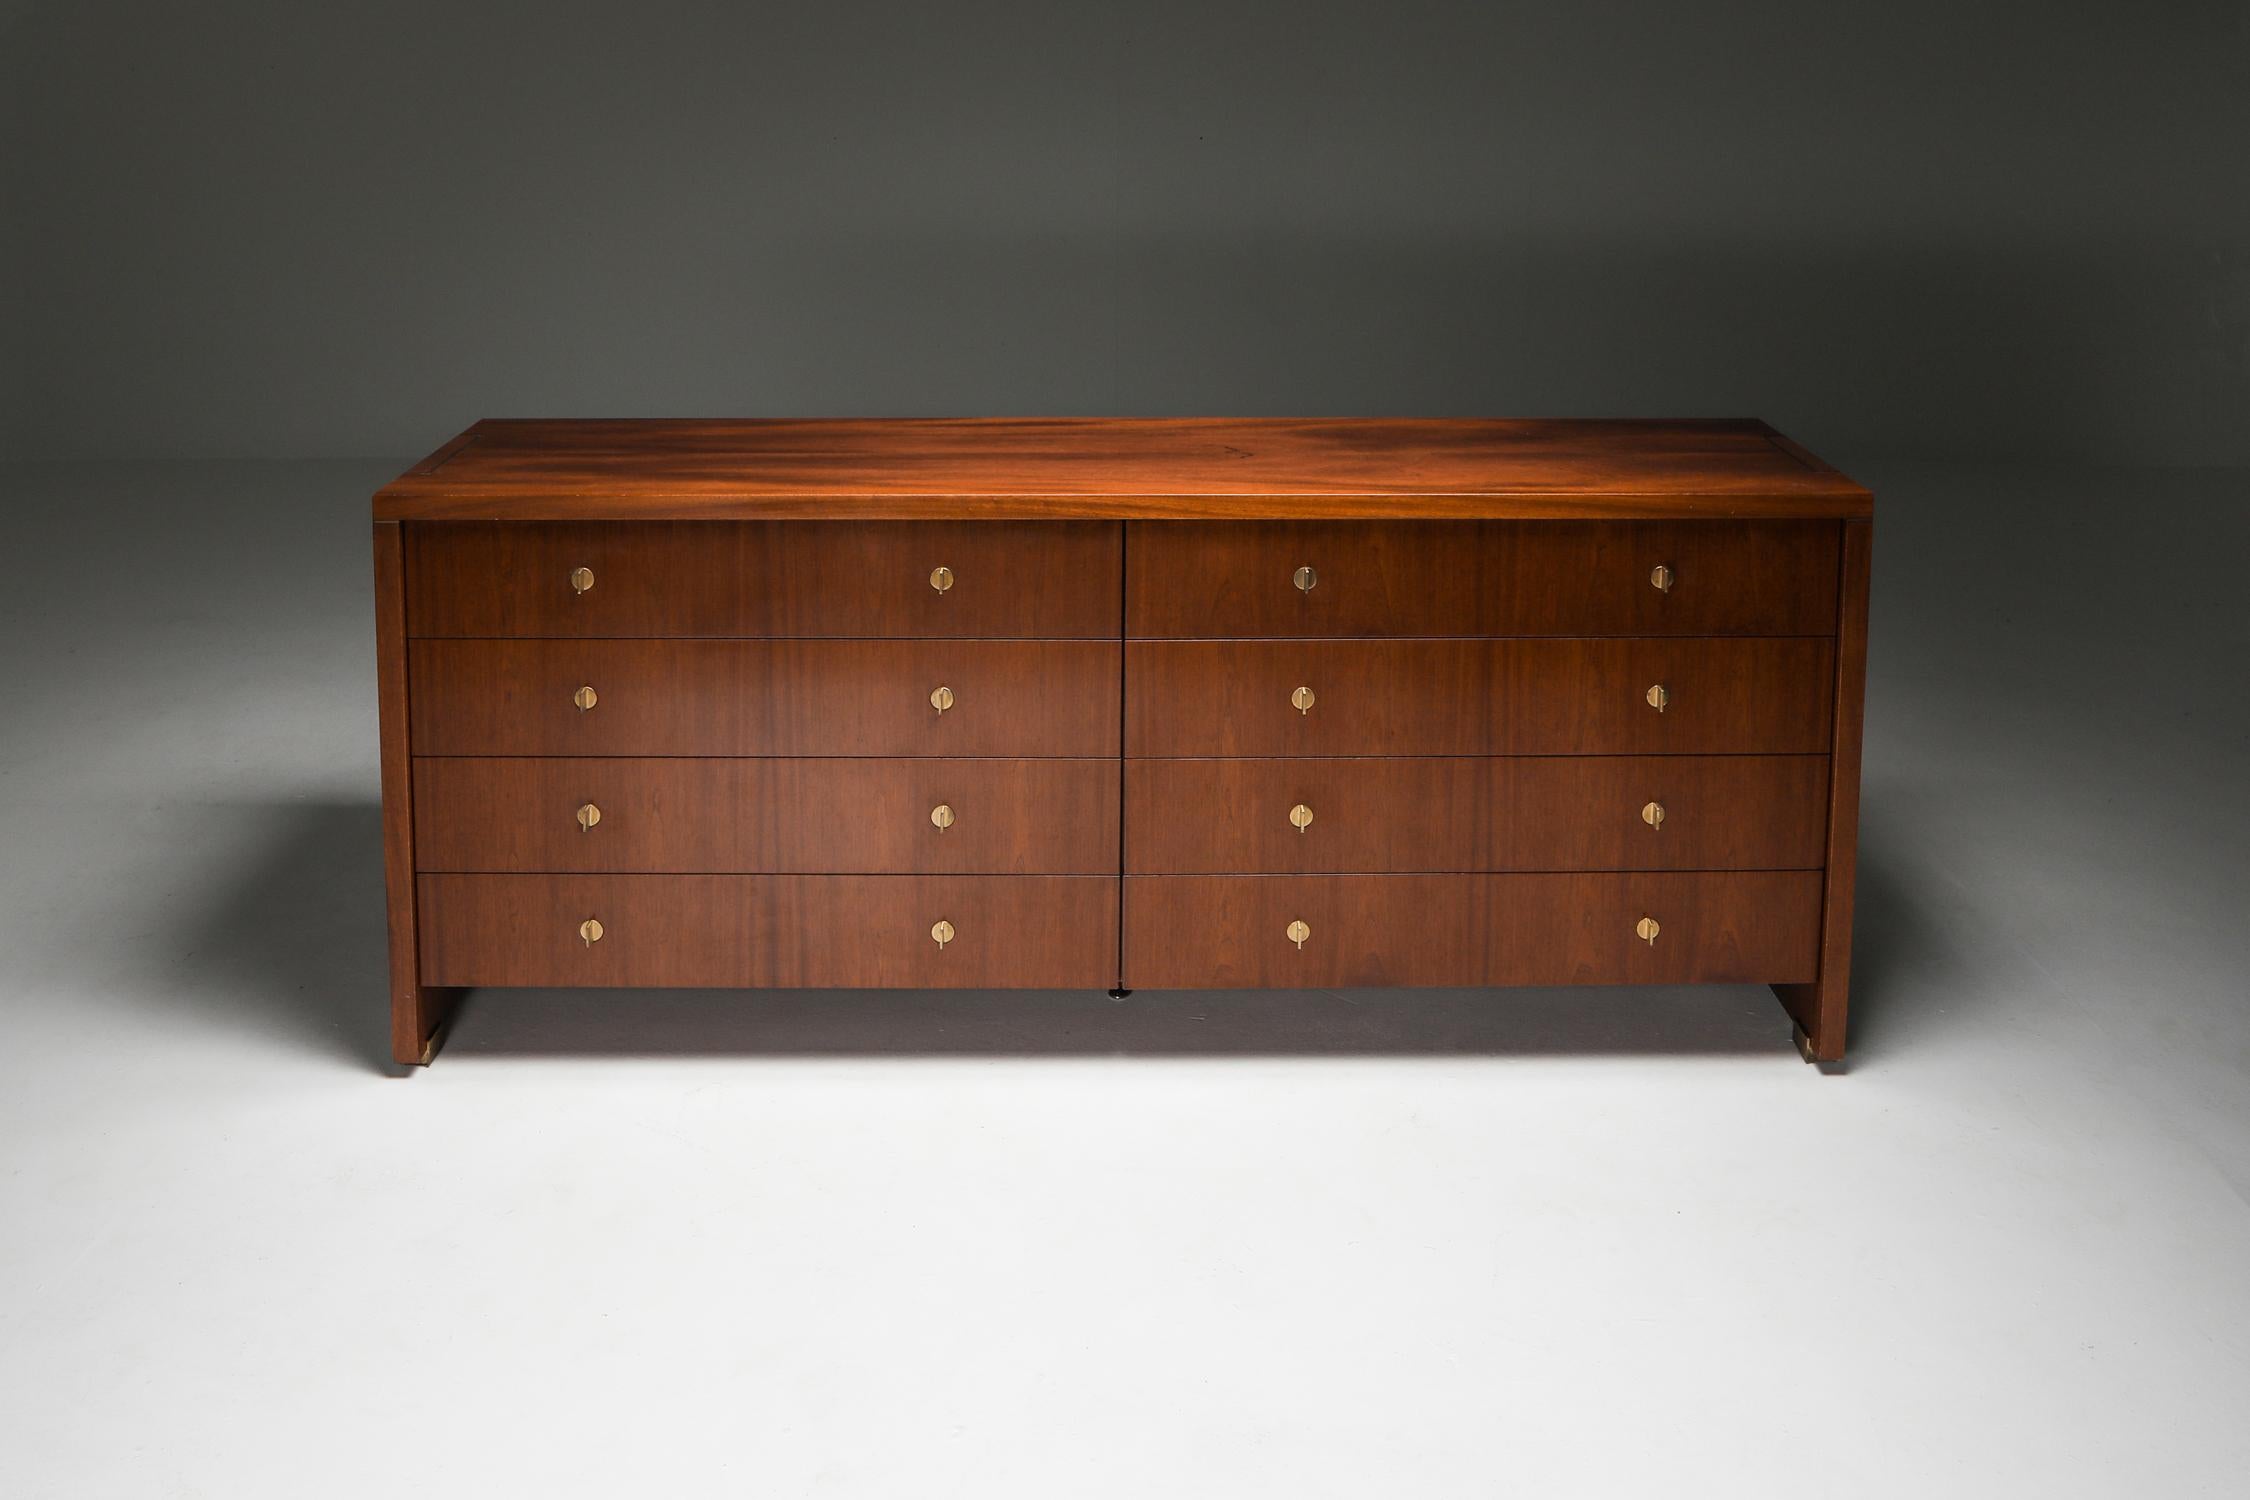 Walnut, brass, chest of drawers, Pierre Balmain, France circa 1965.


High-end chest of drawers, the walnut veneer used is one of the most beautiful I've seen.
The piece rests on bronze feet, an architectural gesture making it much lighter to the